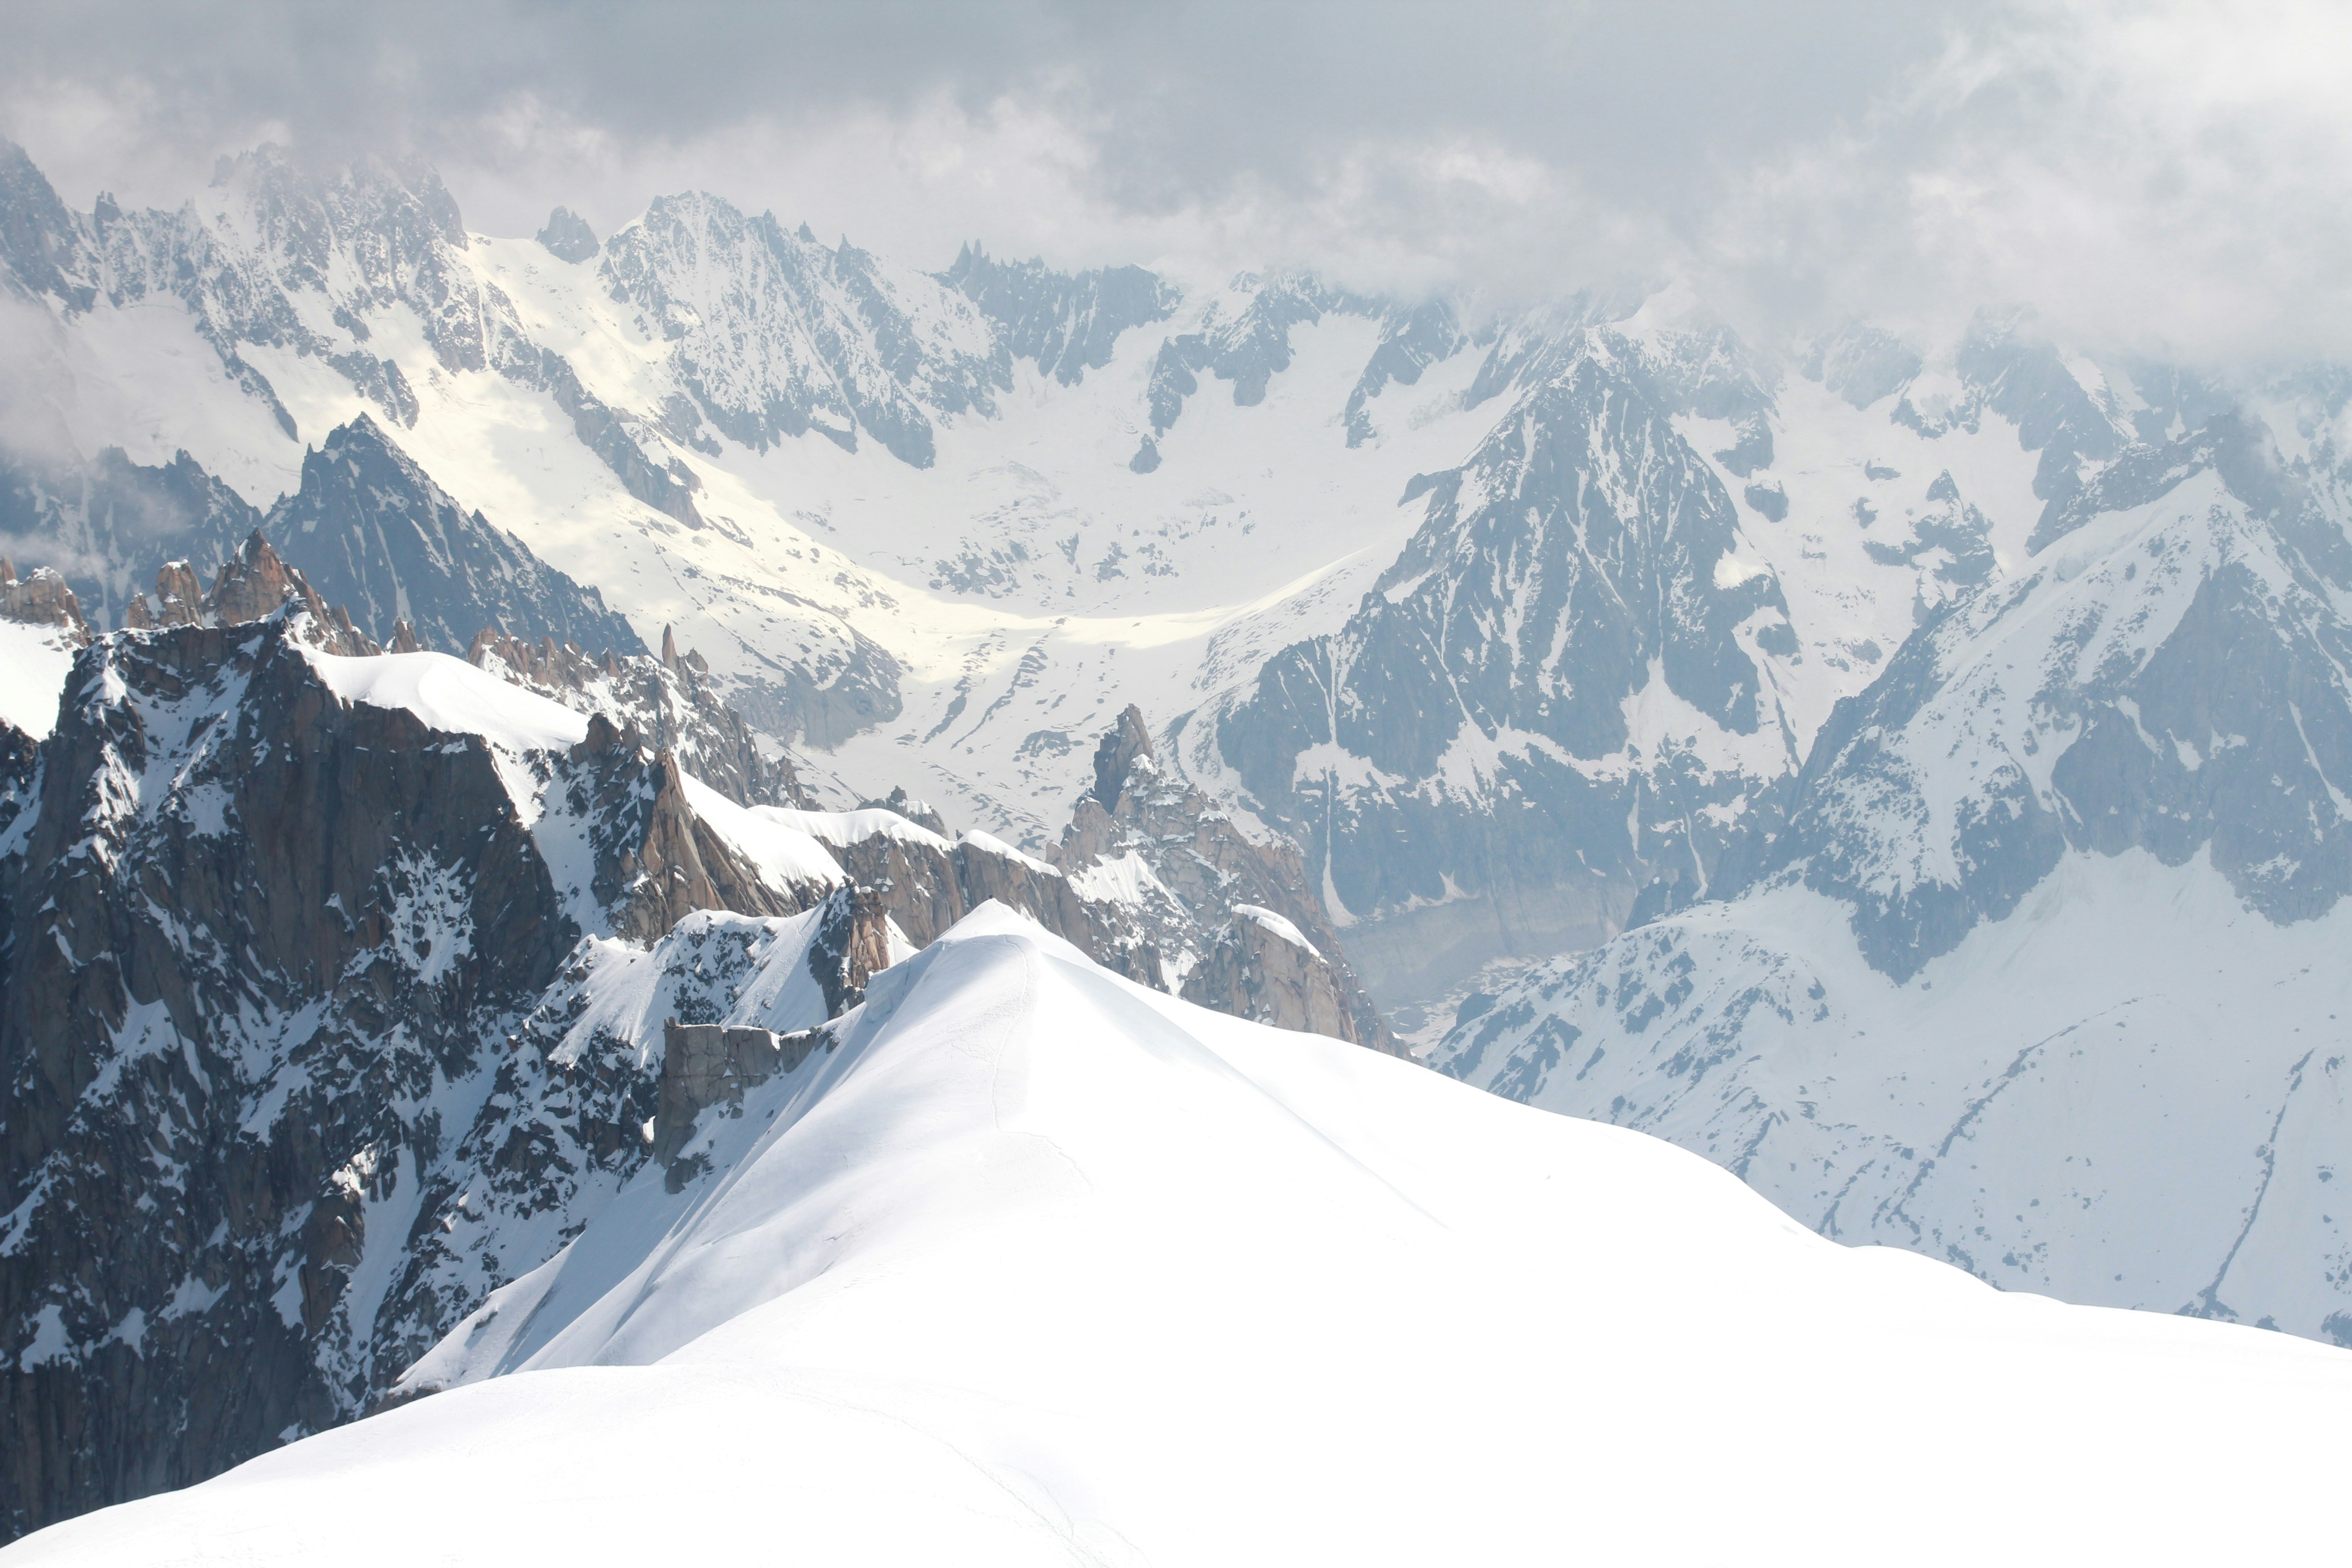 Image of mountains and snow in the French Alps.